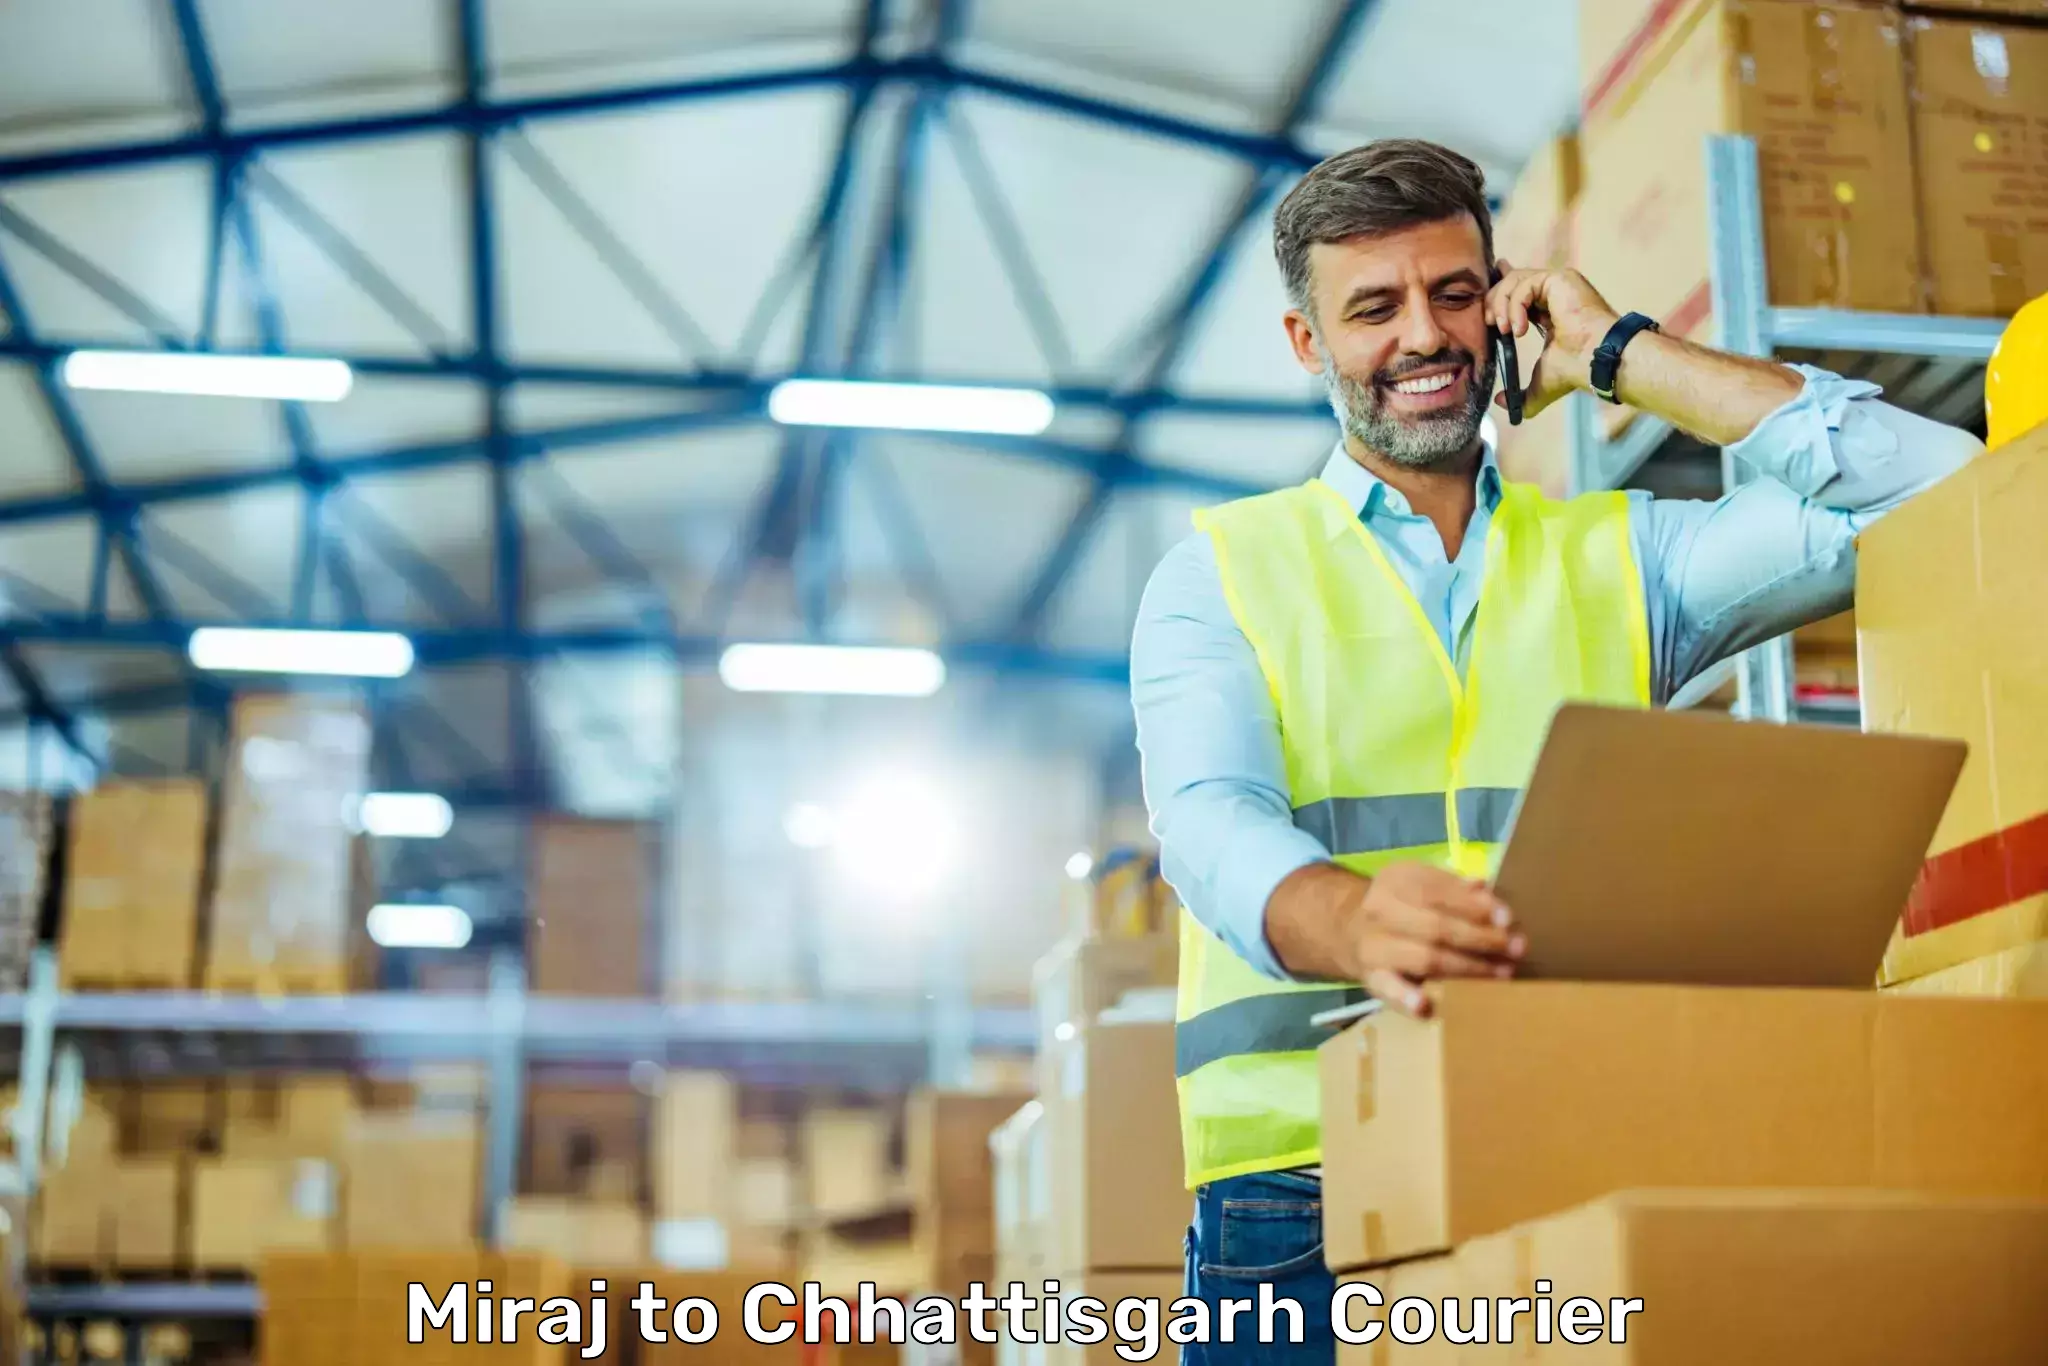 State-of-the-art courier technology Miraj to Dhamtari